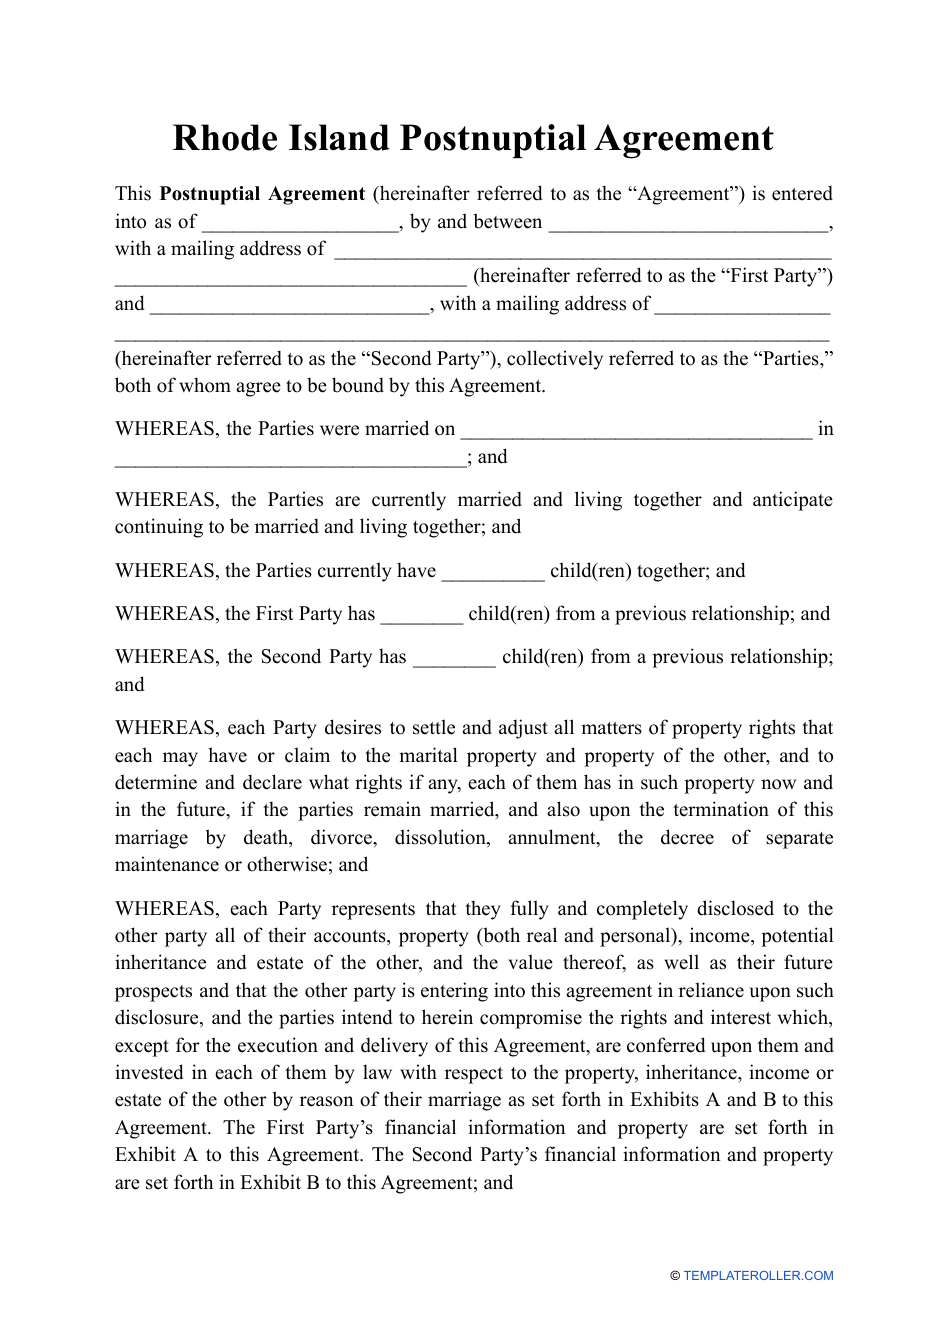 Postnuptial Agreement Template - Rhode Island, Page 1